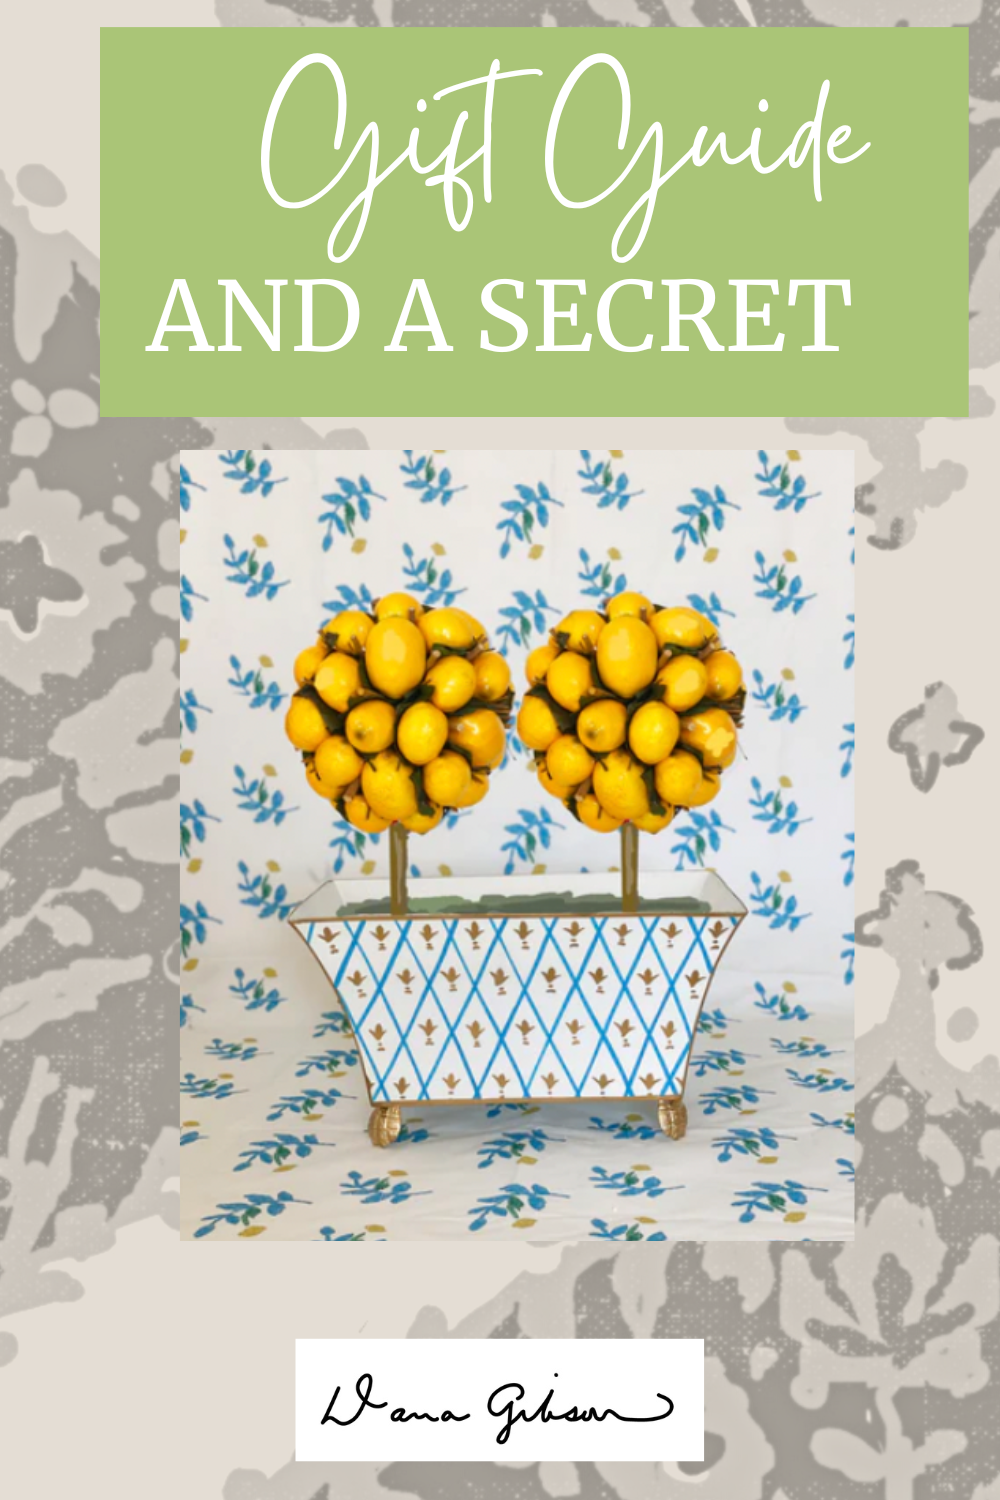 Dana Gibson Gift Guide and a Secret